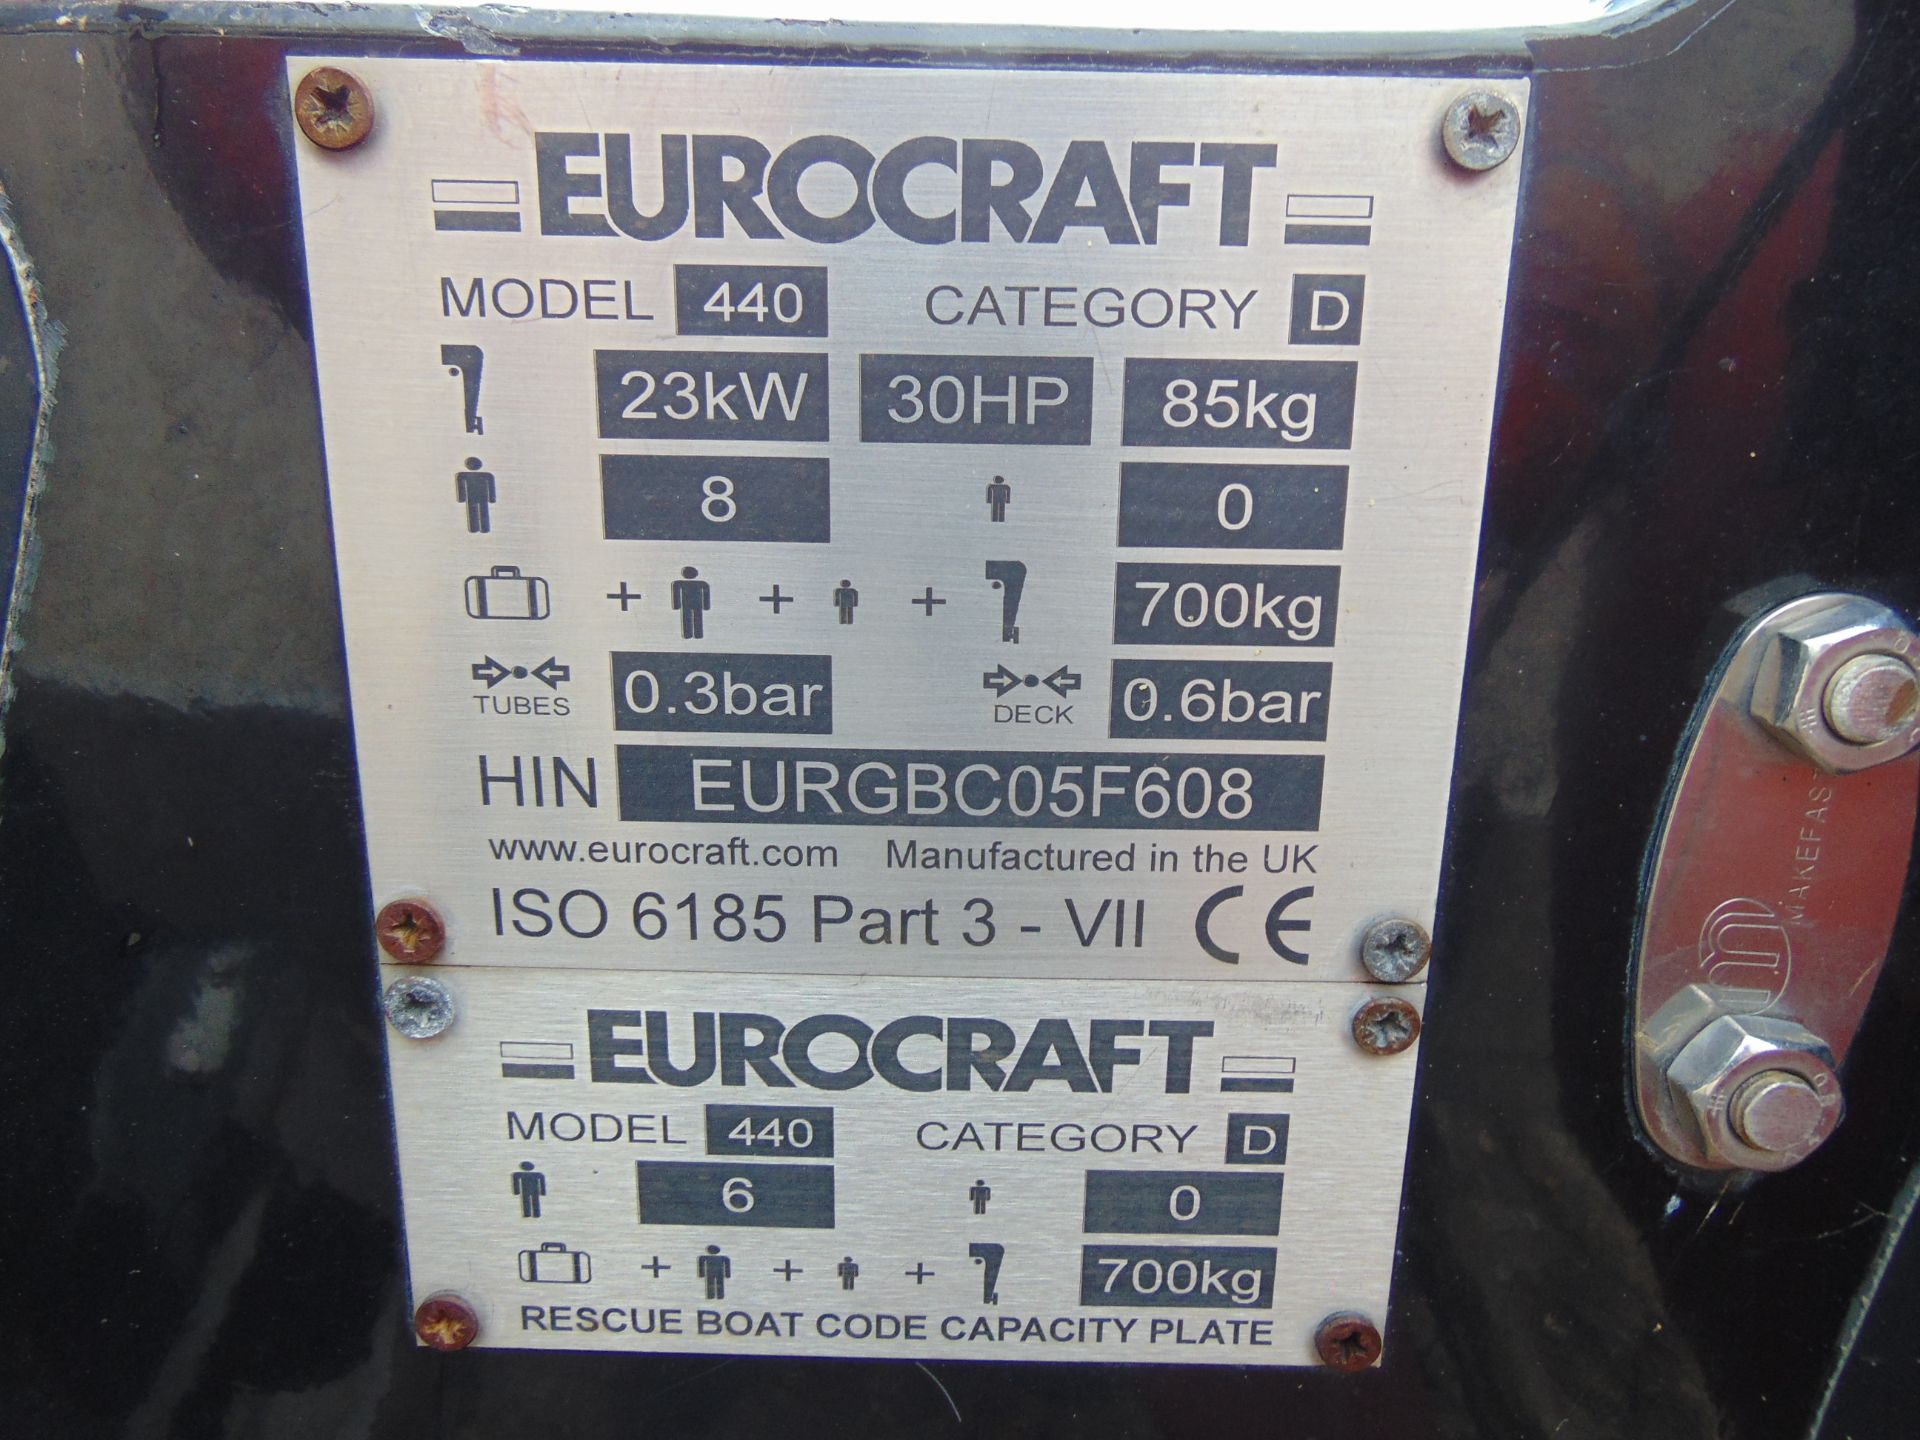 Eurocraft 440 Inflatable Rib C/W Mariner Outboard Motor and Transportation Trailer - Image 17 of 26